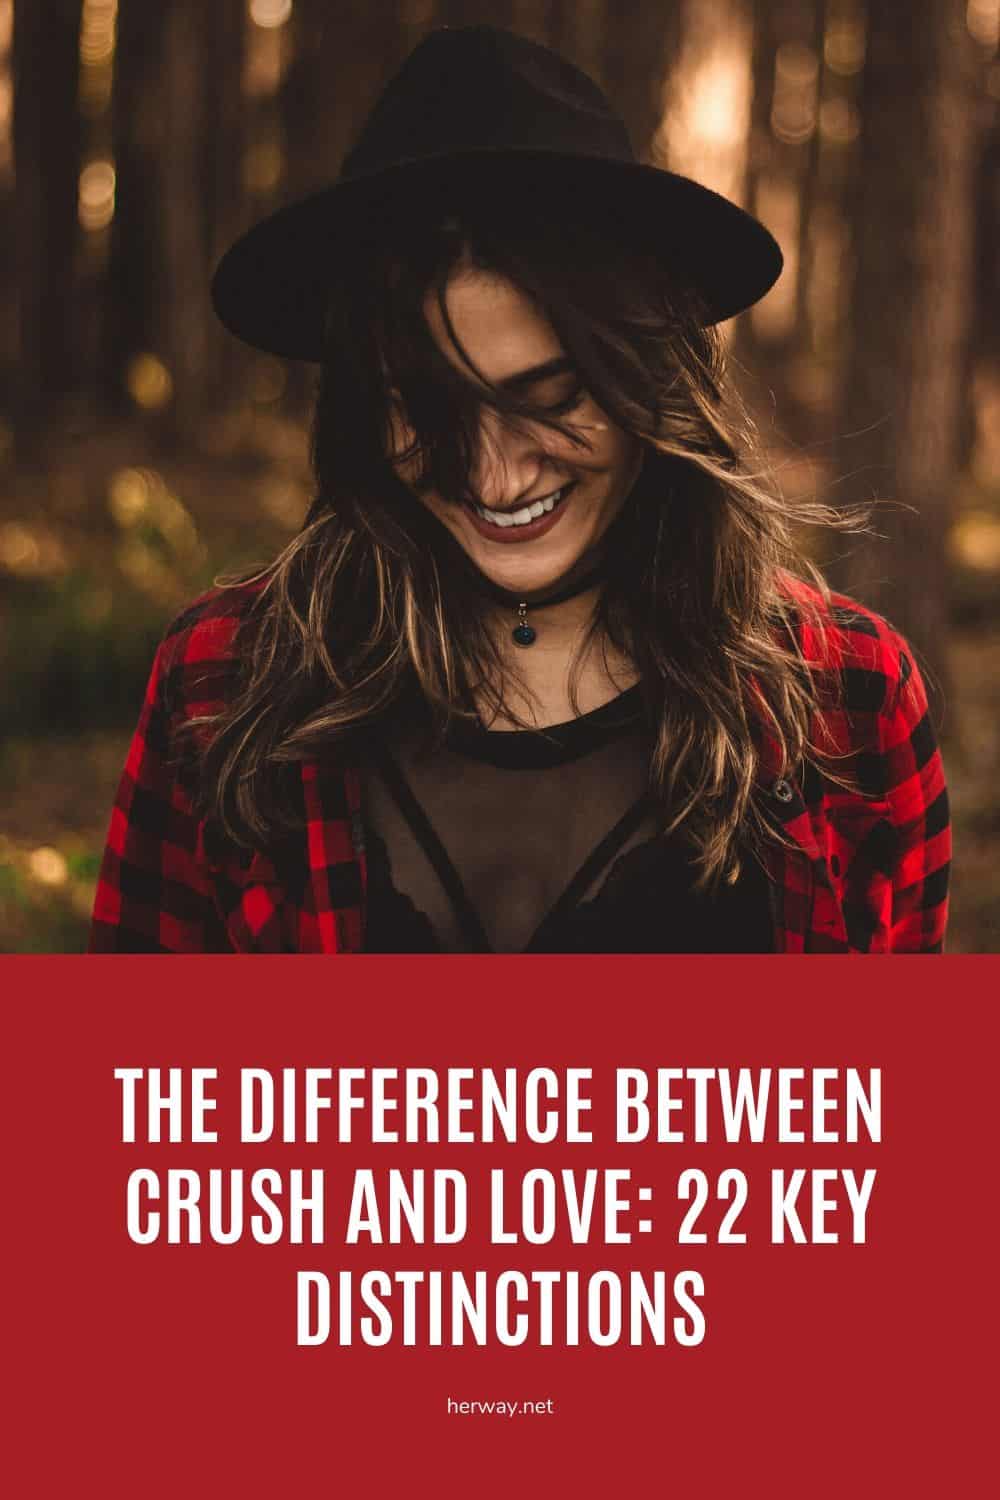 The Difference Between Crush And Love: 22 Key Distinctions